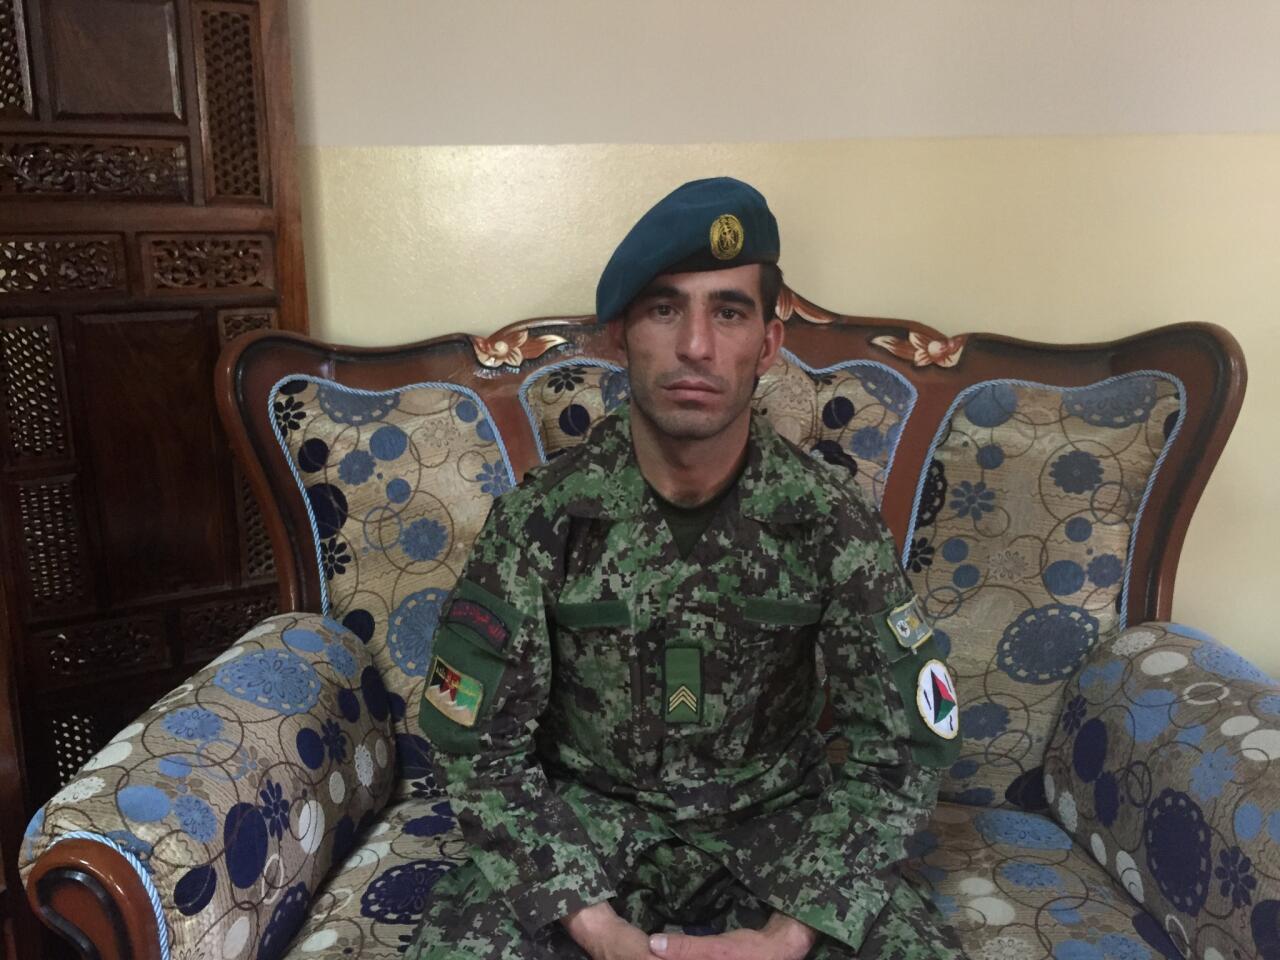 Afghan army Staff Sgt. Isa Khan Laghmani, 28, is shown Tuesday, one day after he says he shot all six Taliban gunmen threatening the parliament building in Kabul, Afghanistan.